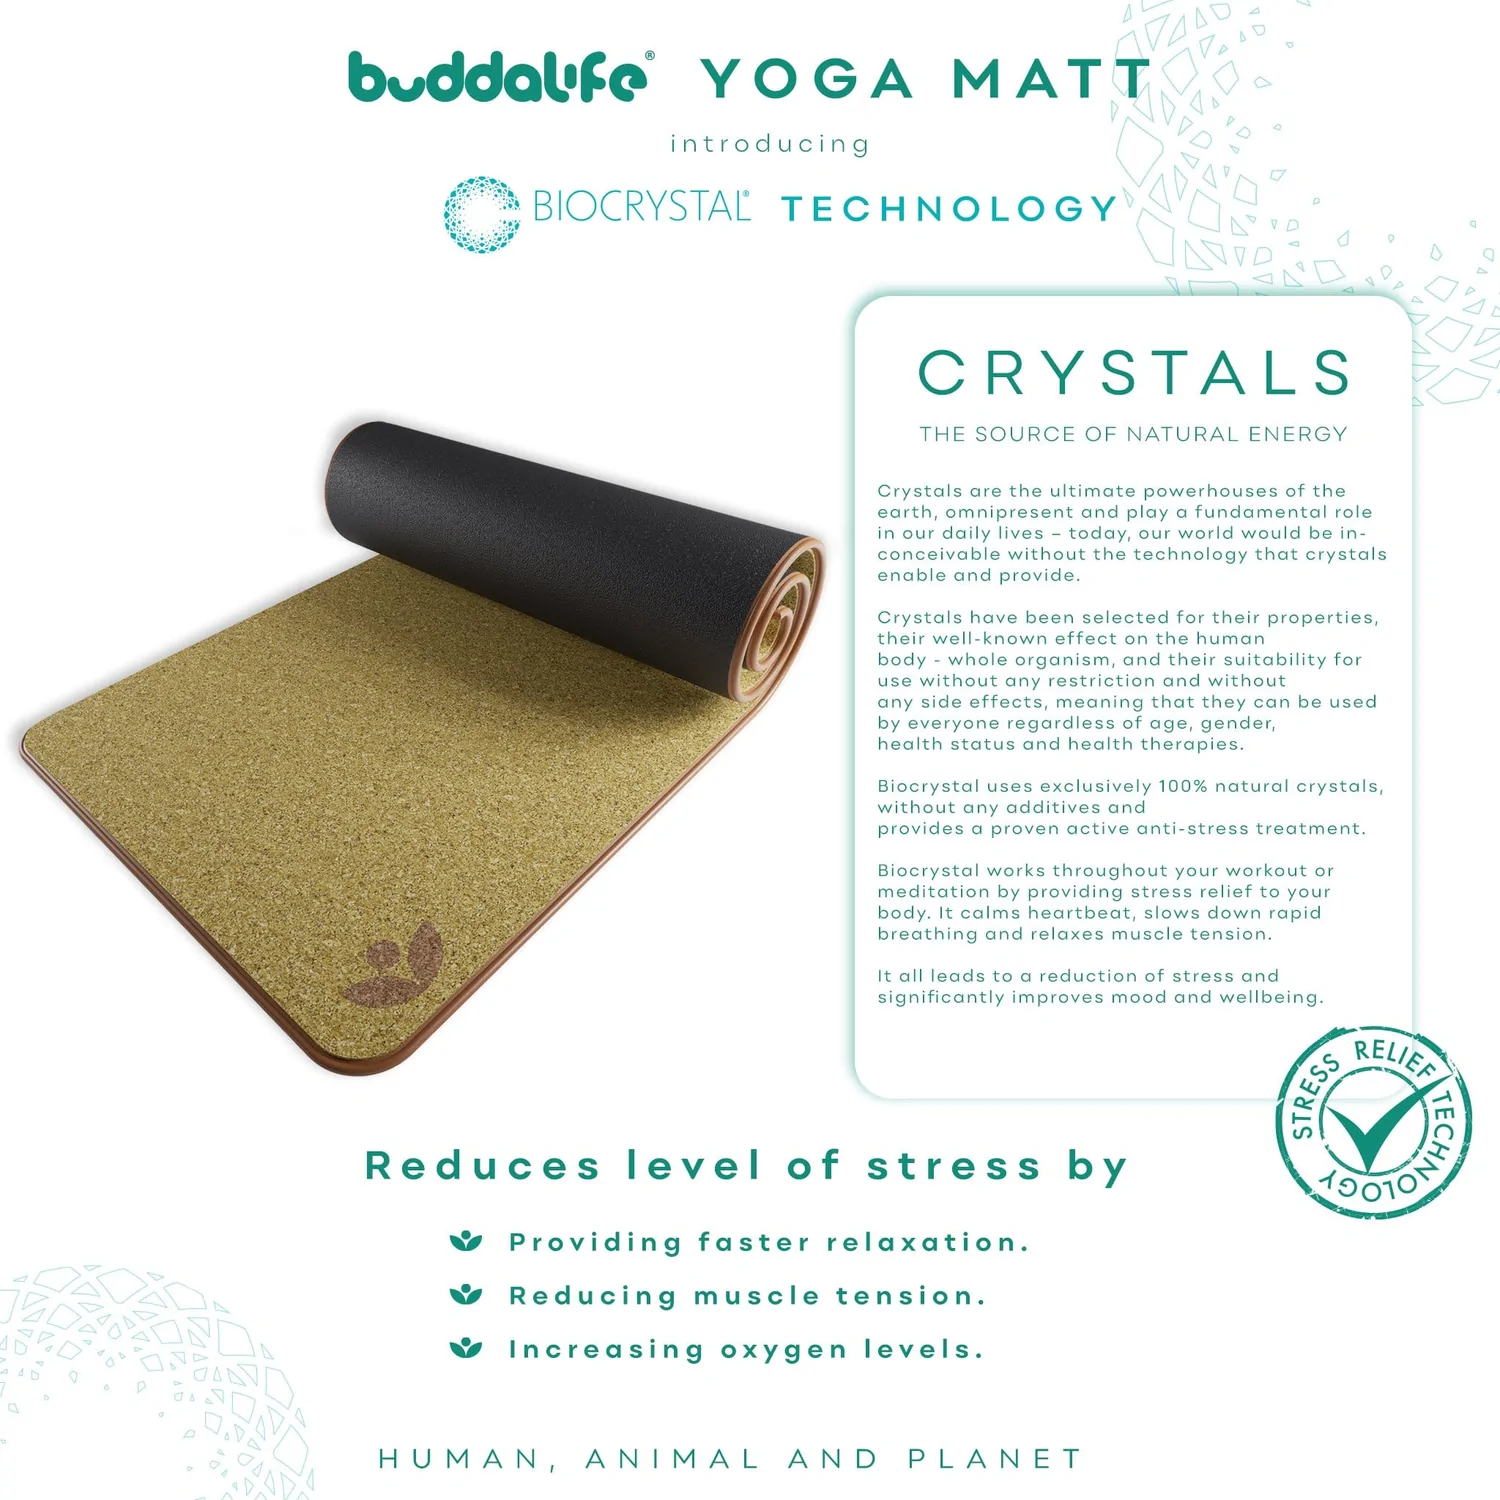 buddalife-biocrystal-yoga-matt-benefits-of-crystals-100_-recycled-natural-ethically-sourced (1)